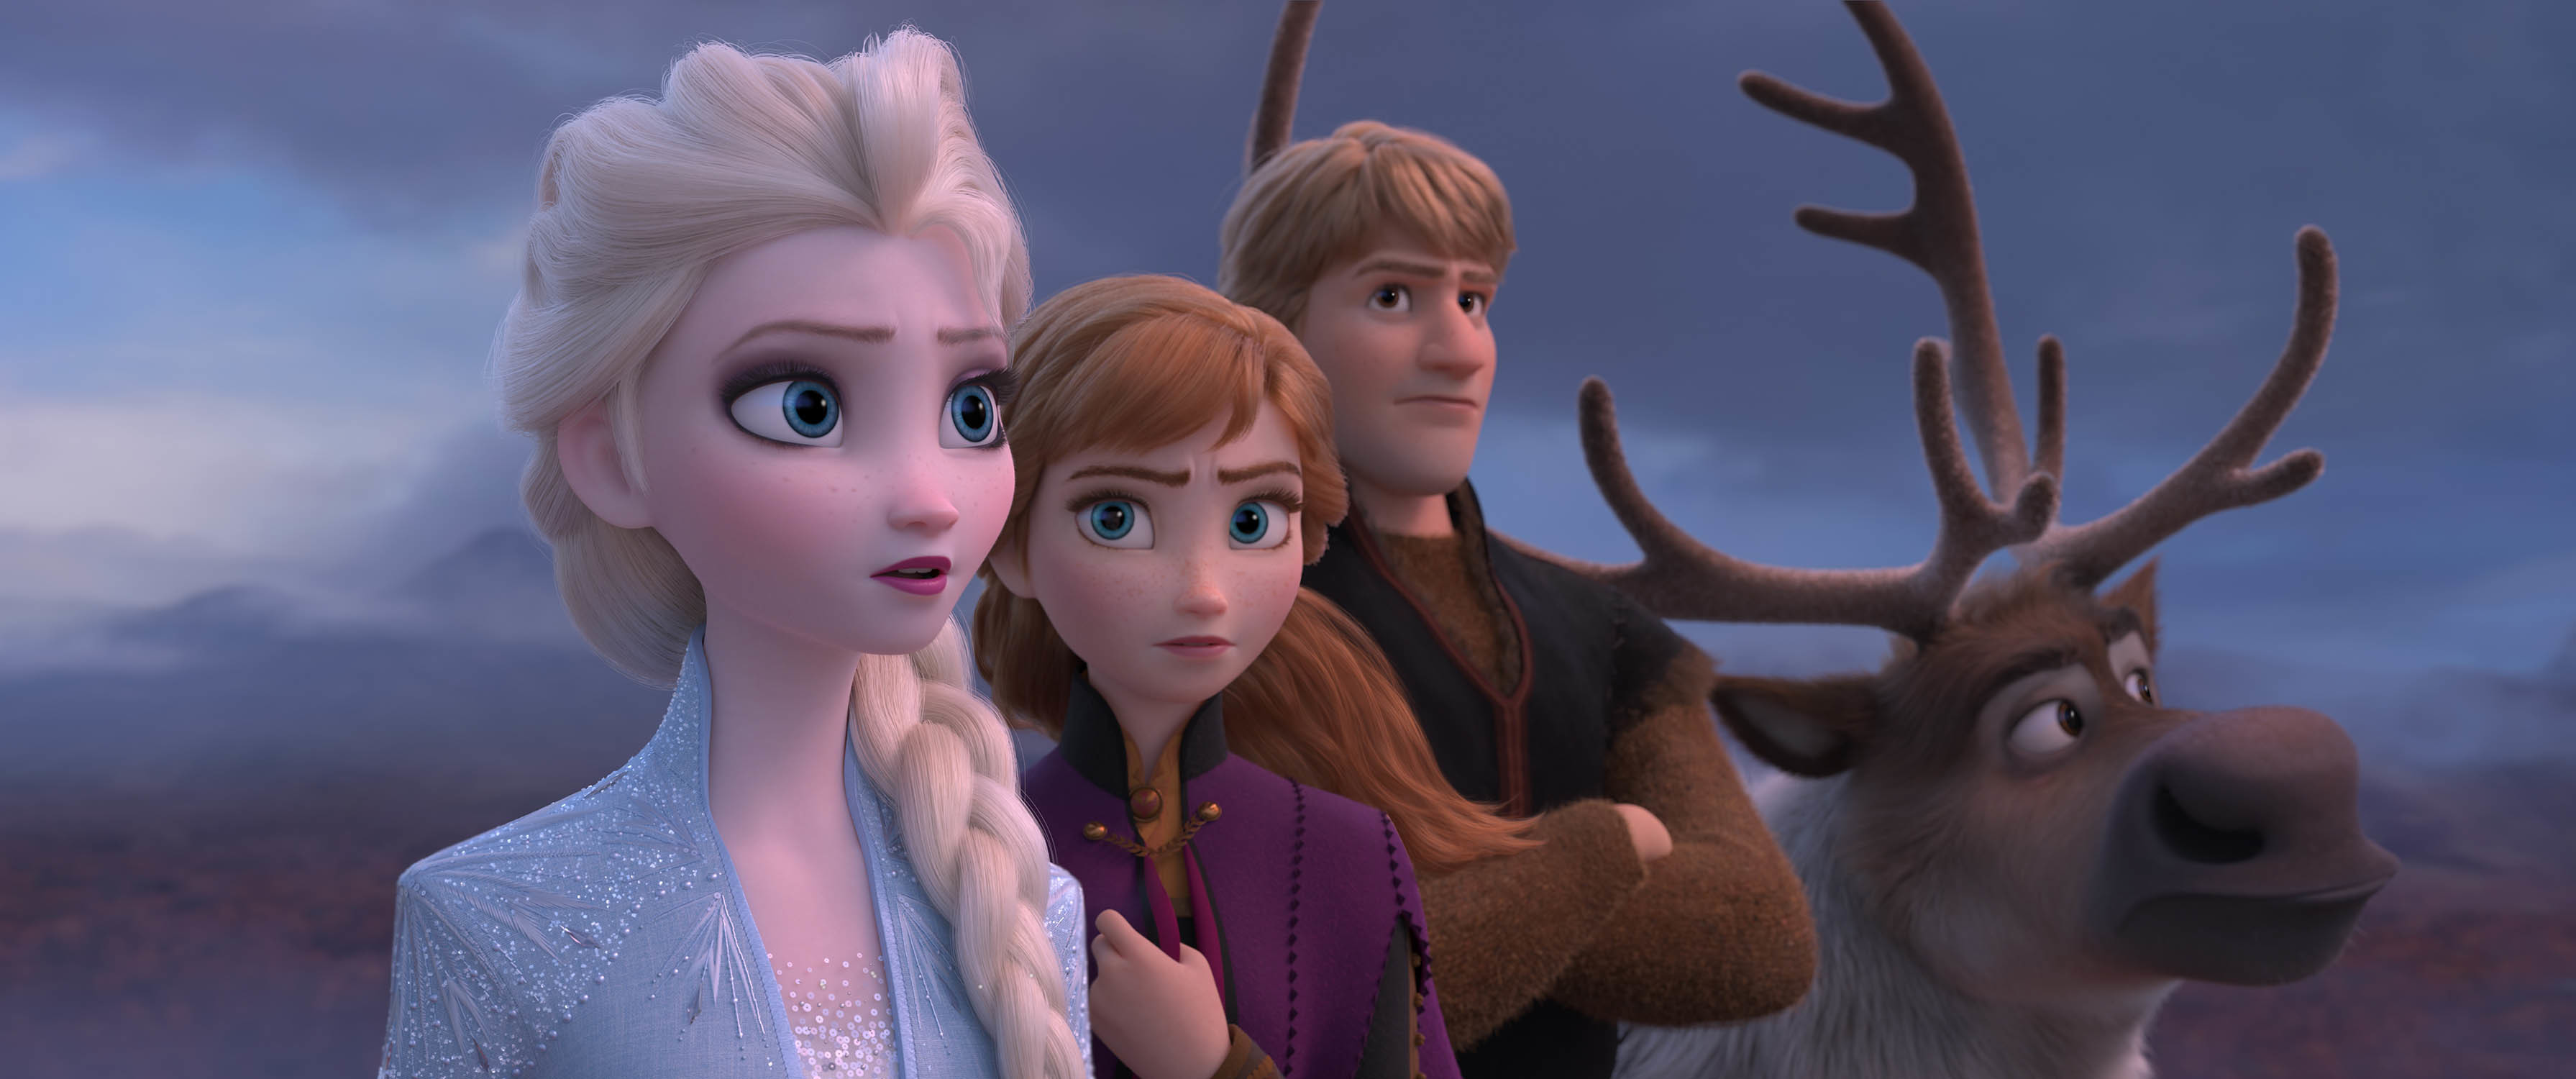 download the new version for windows Frozen II